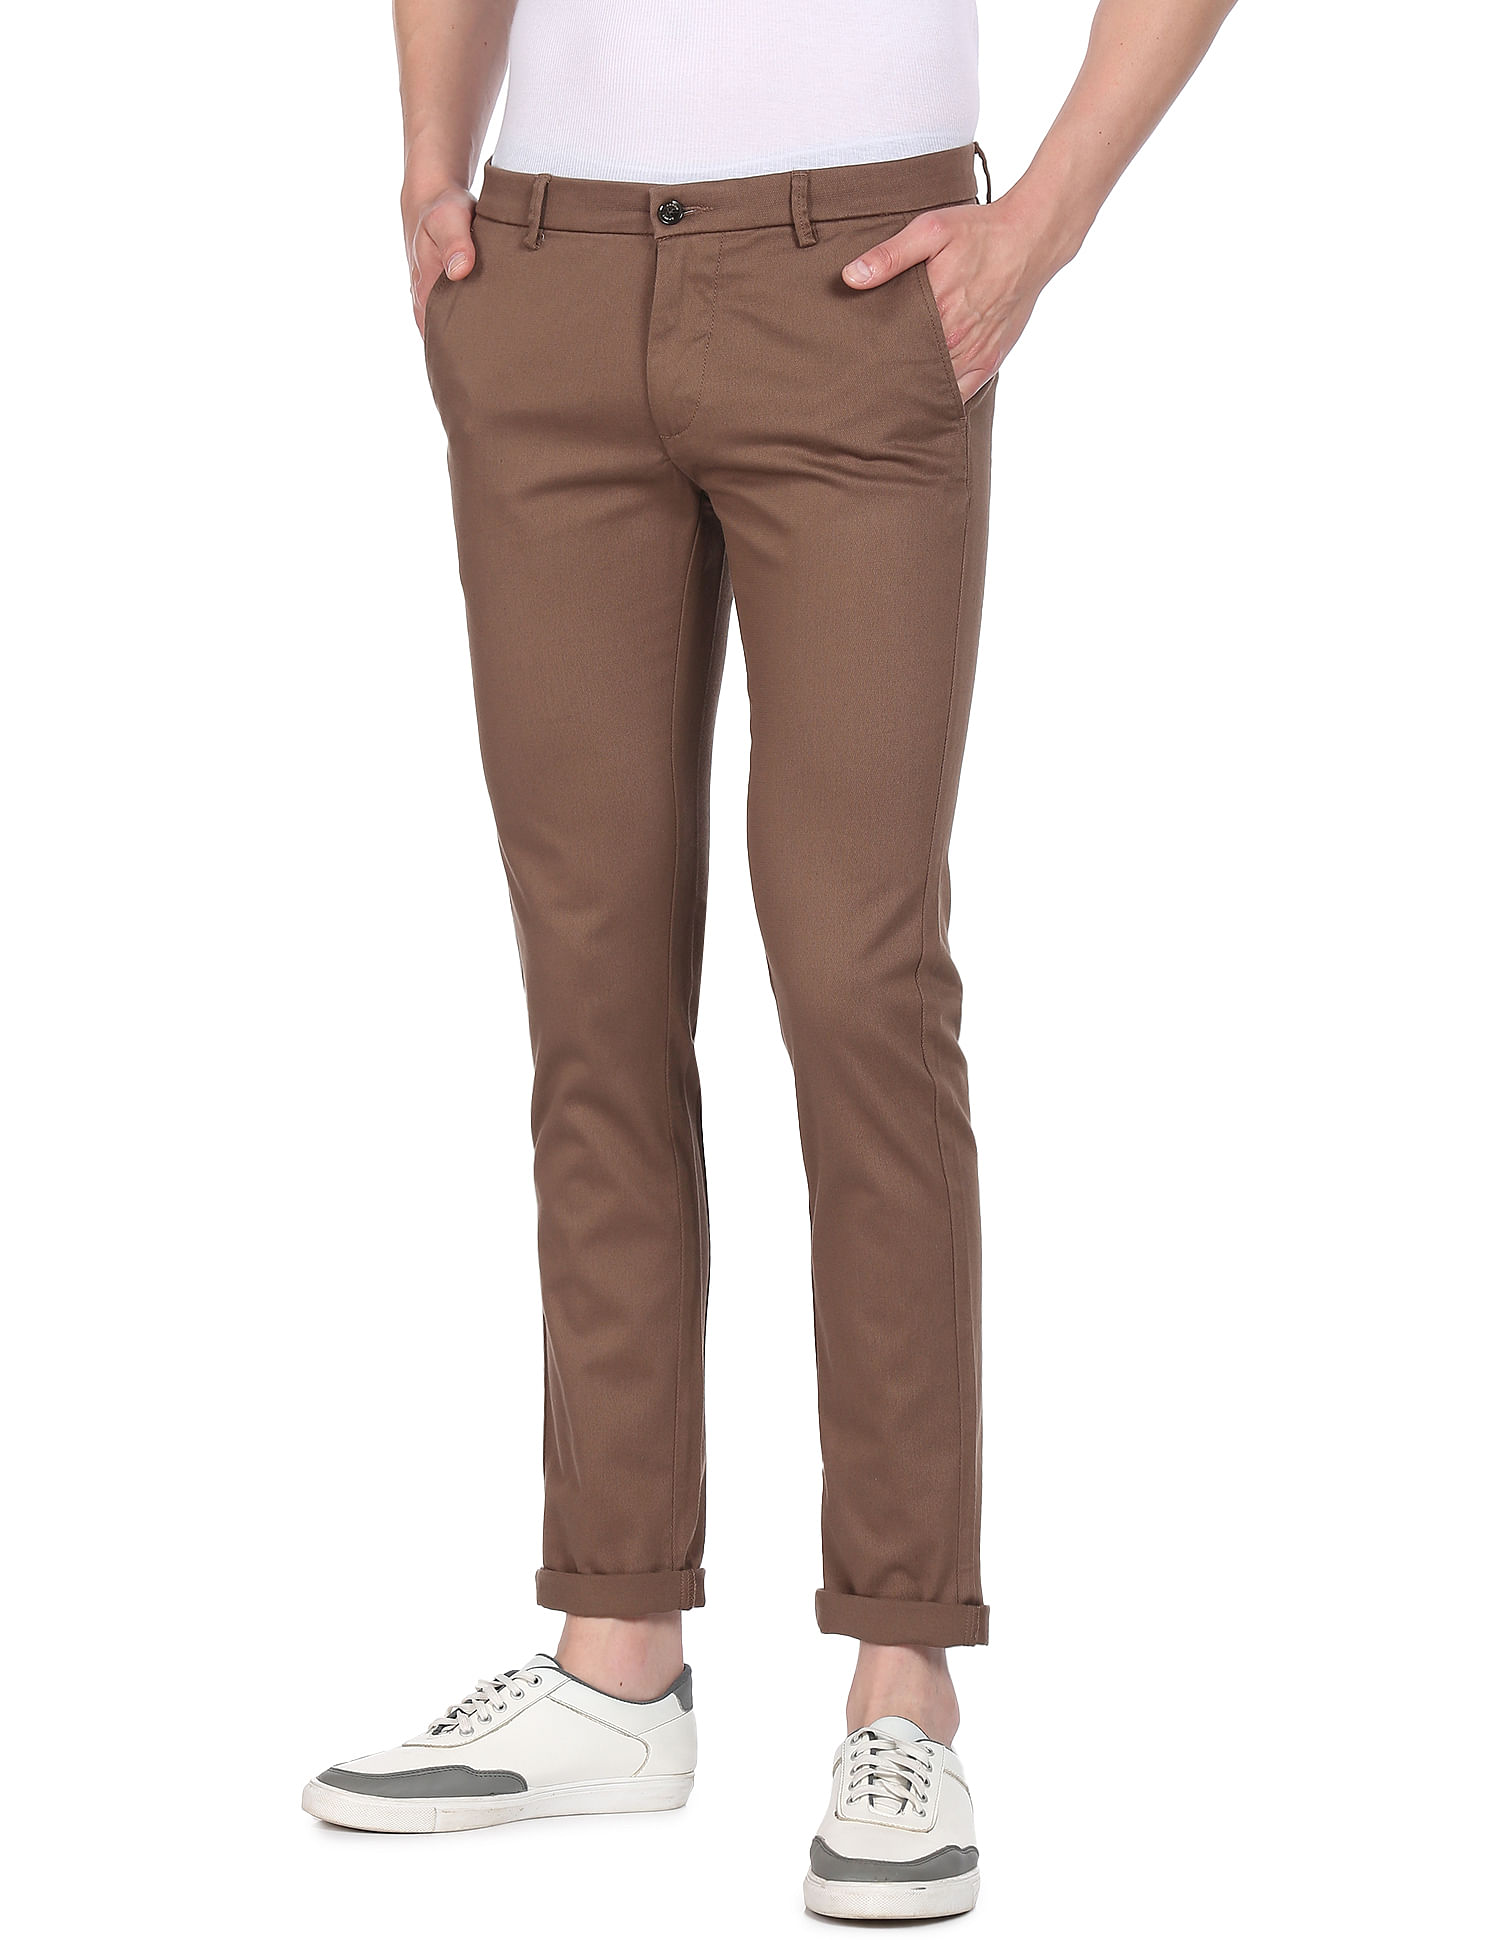 Buy U.S. Polo Assn. Twill Austin Trim Fit Solid Casual Trousers - NNNOW.com